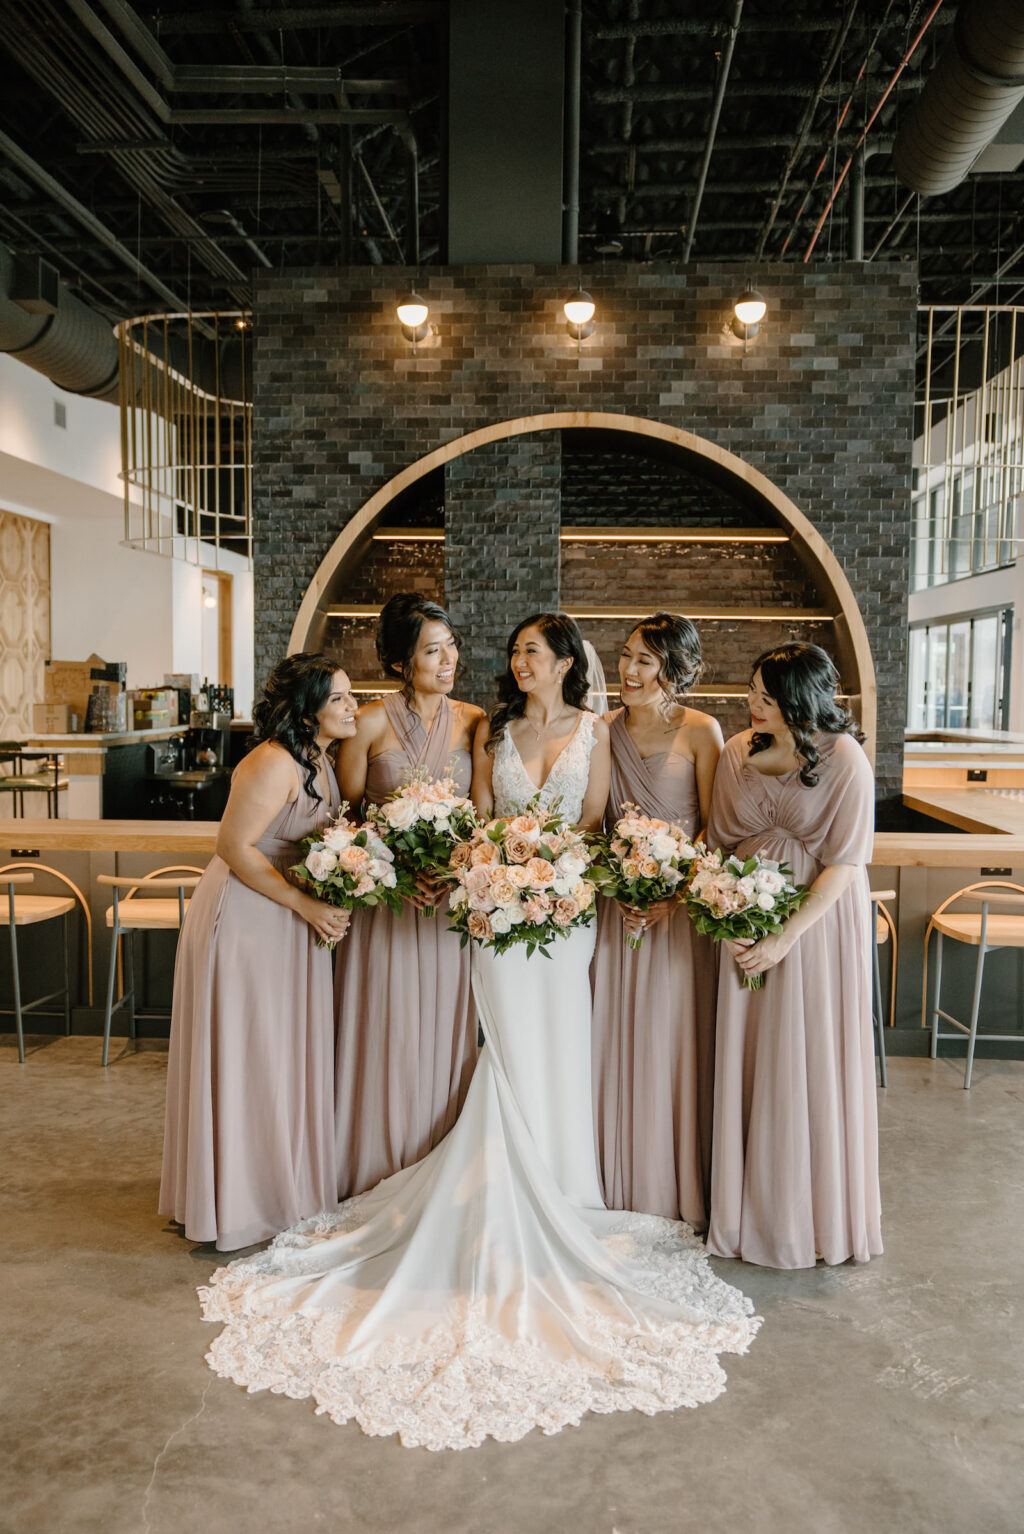 Modern Boho Bride Wearing Lace Train and Crepe Wedding Dress and Bridesmaids in Mauve Mix and Match Dresses | Unique South Tampa Wedding Venue Hyde House | Wedding Hair and Makeup Adore Bridal | Wedding Florist Iza's Flowers